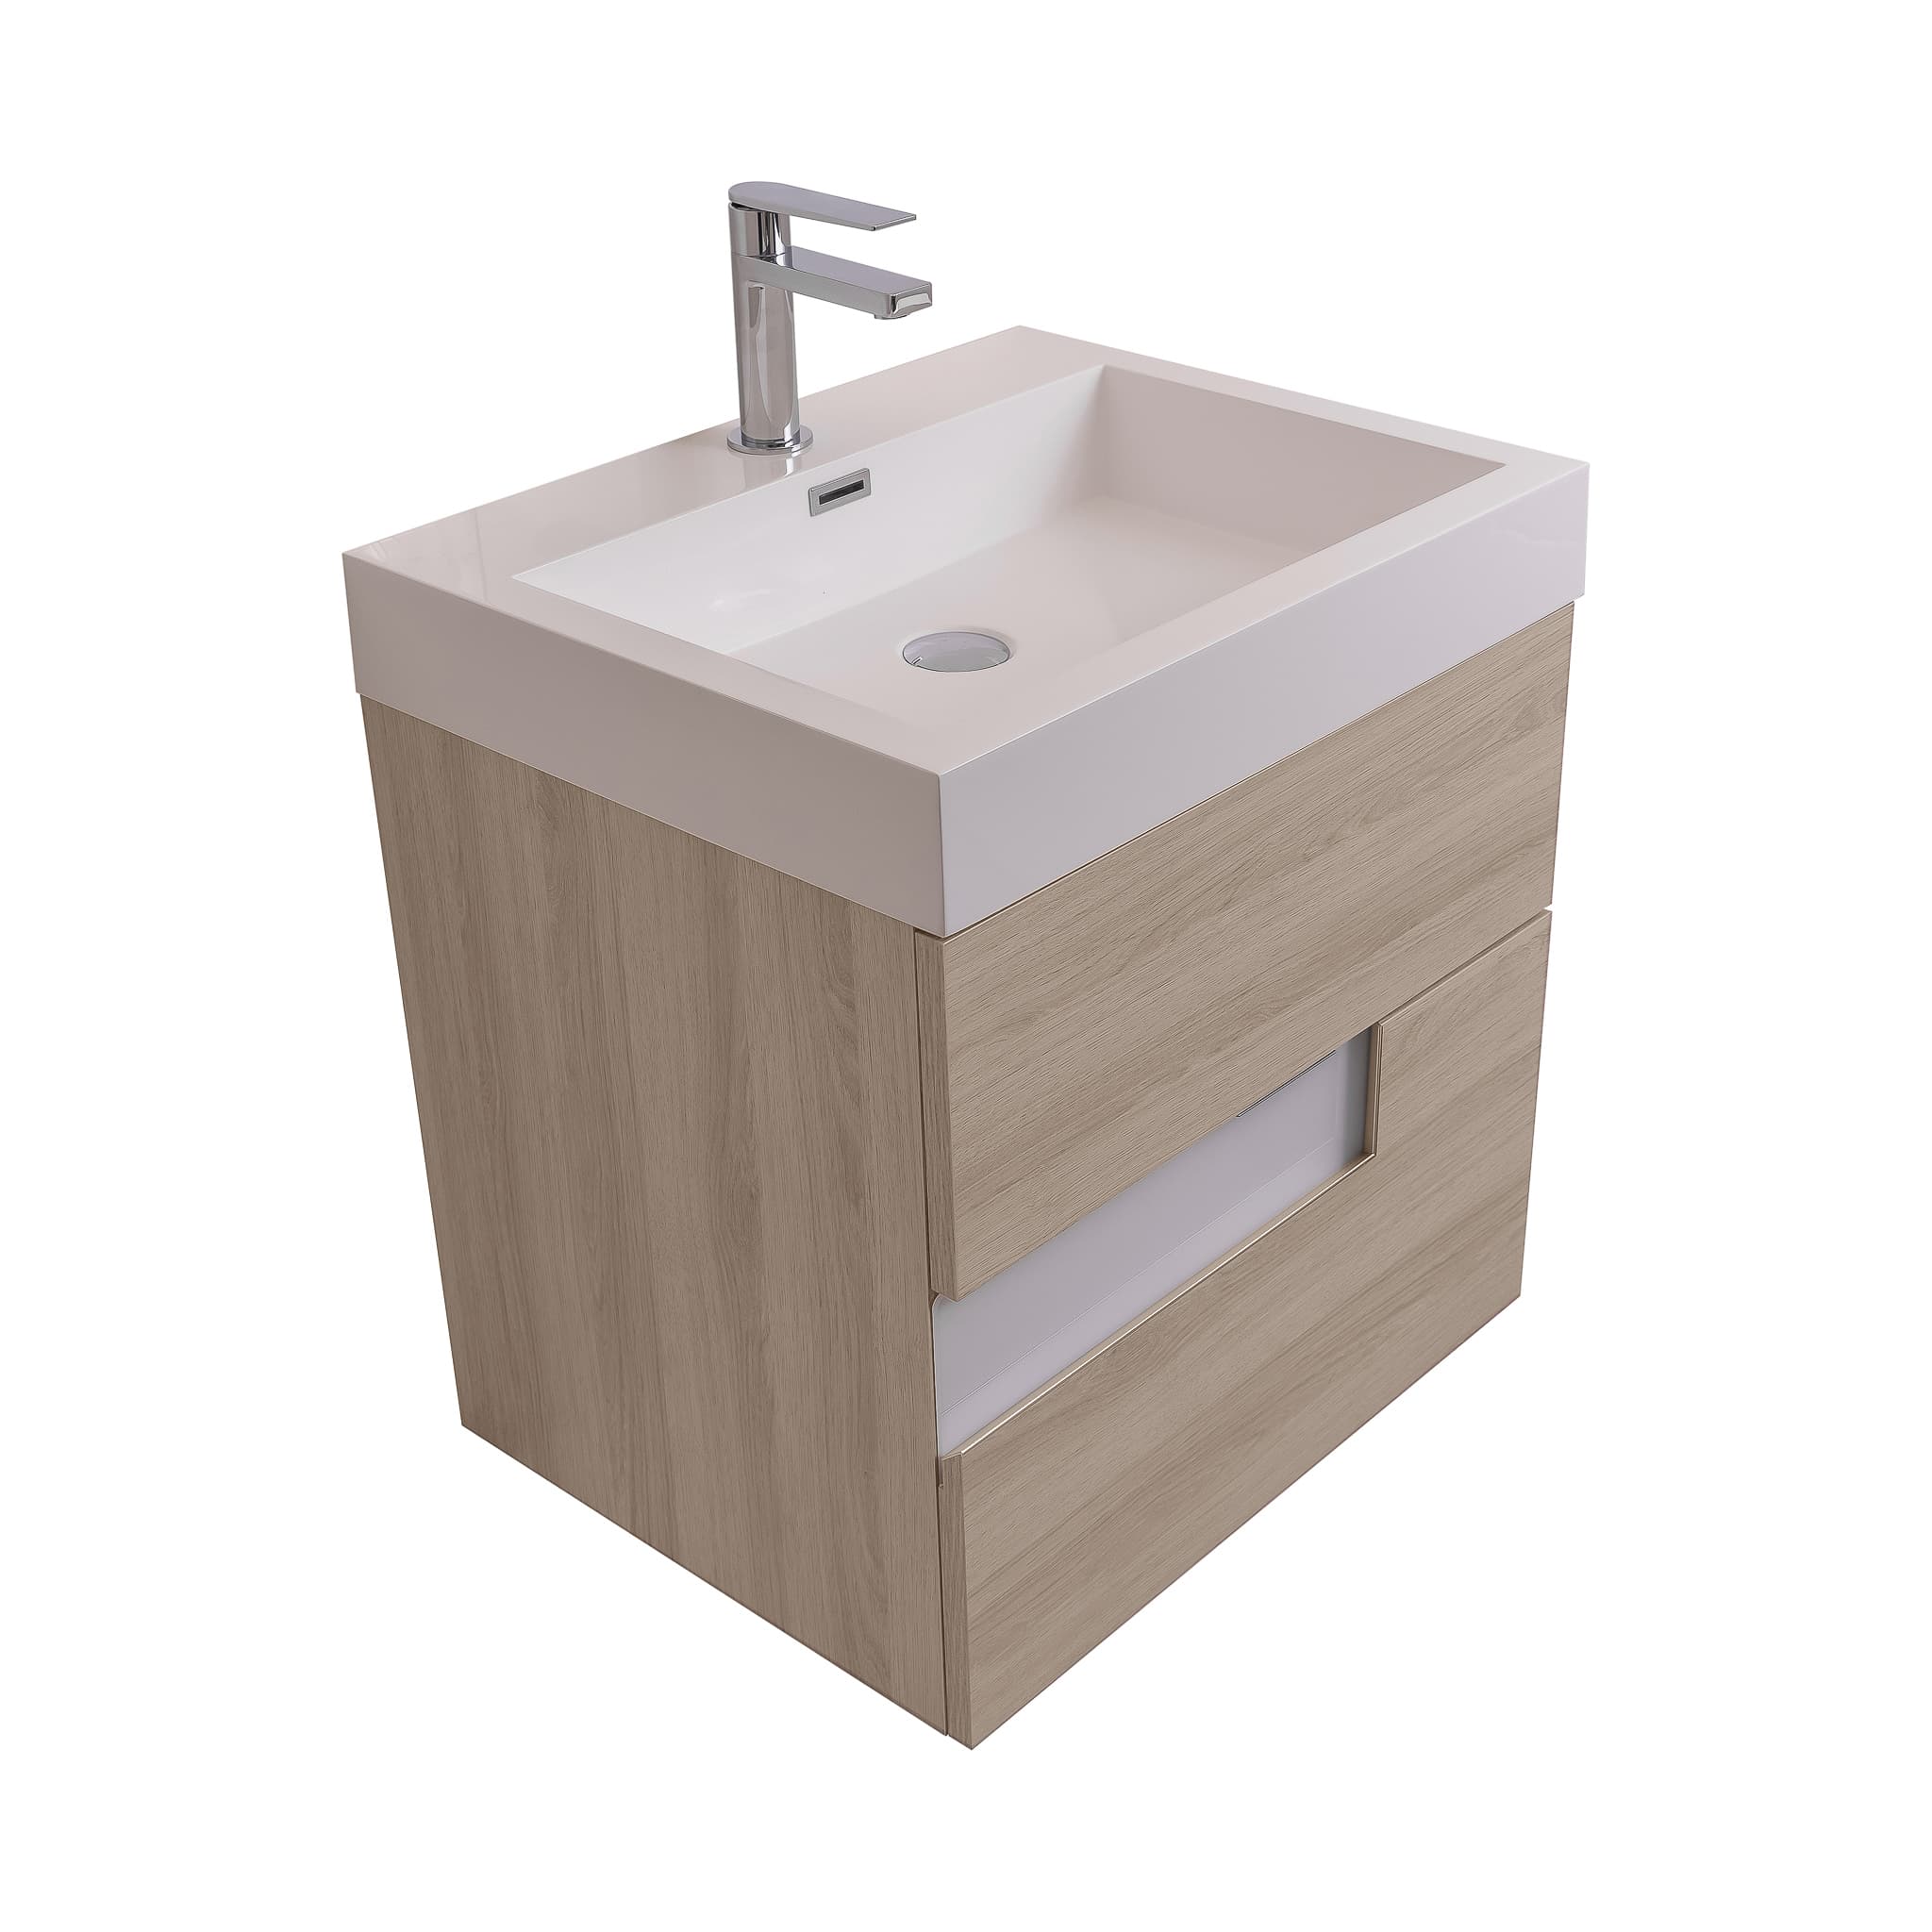 Vision 23.5 Natural Light Wood Cabinet, Square Cultured Marble Sink, Wall Mounted Modern Vanity Set